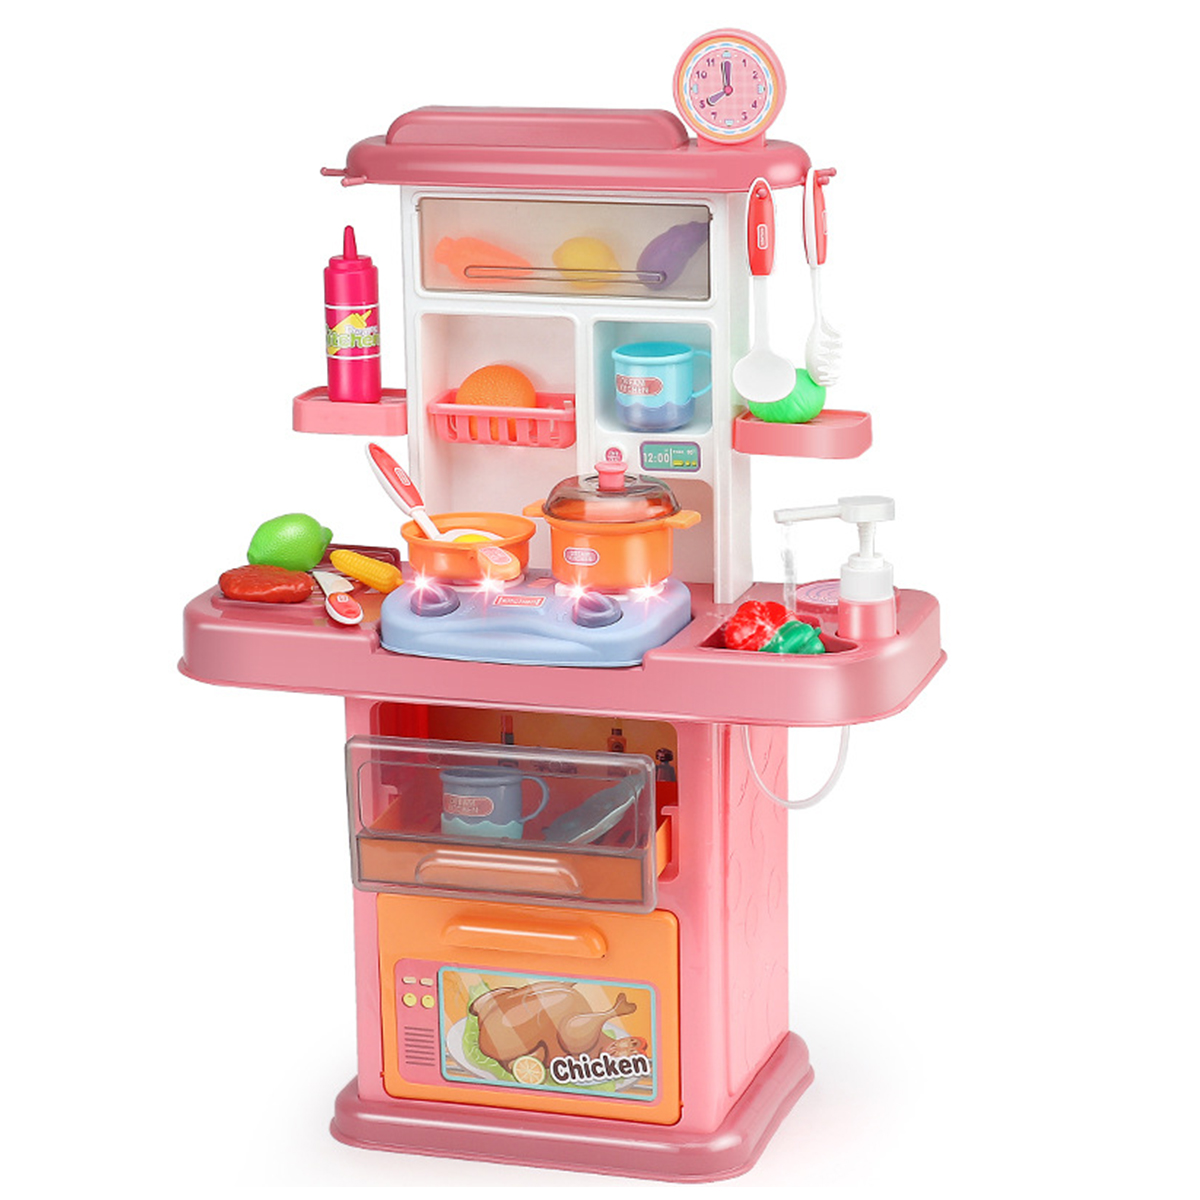 Dream-Kitchen-Role-Play-Cooking-Children-Tableware-Toys-Set-with-Sound-Light-Water-Outlet-Funtion-1678214-5